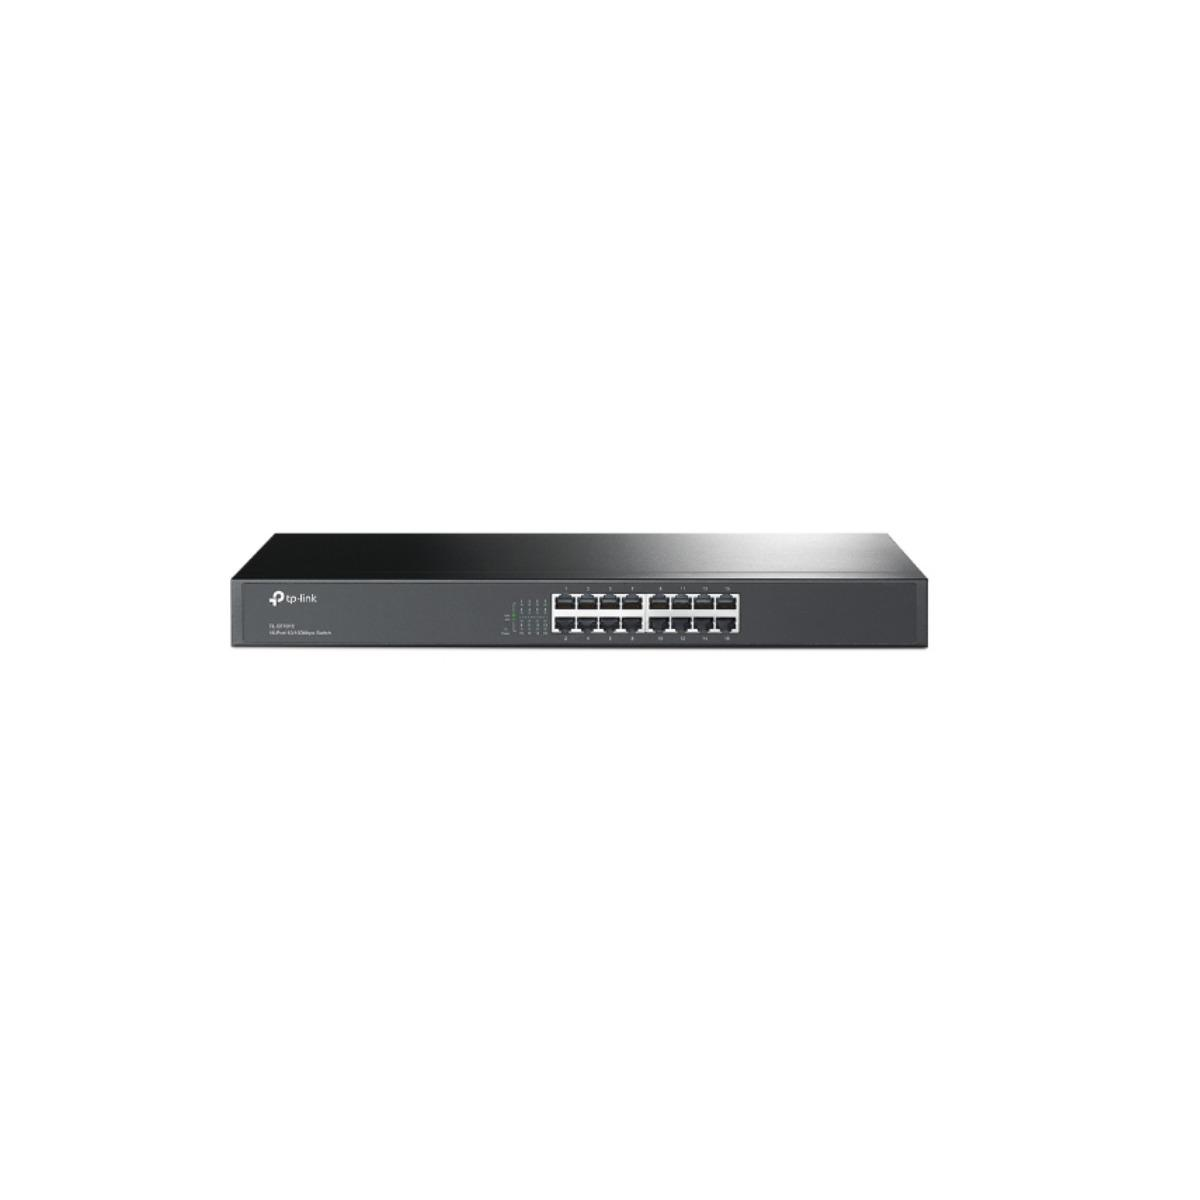 TP-LINK TL-SF1016 Switch 16